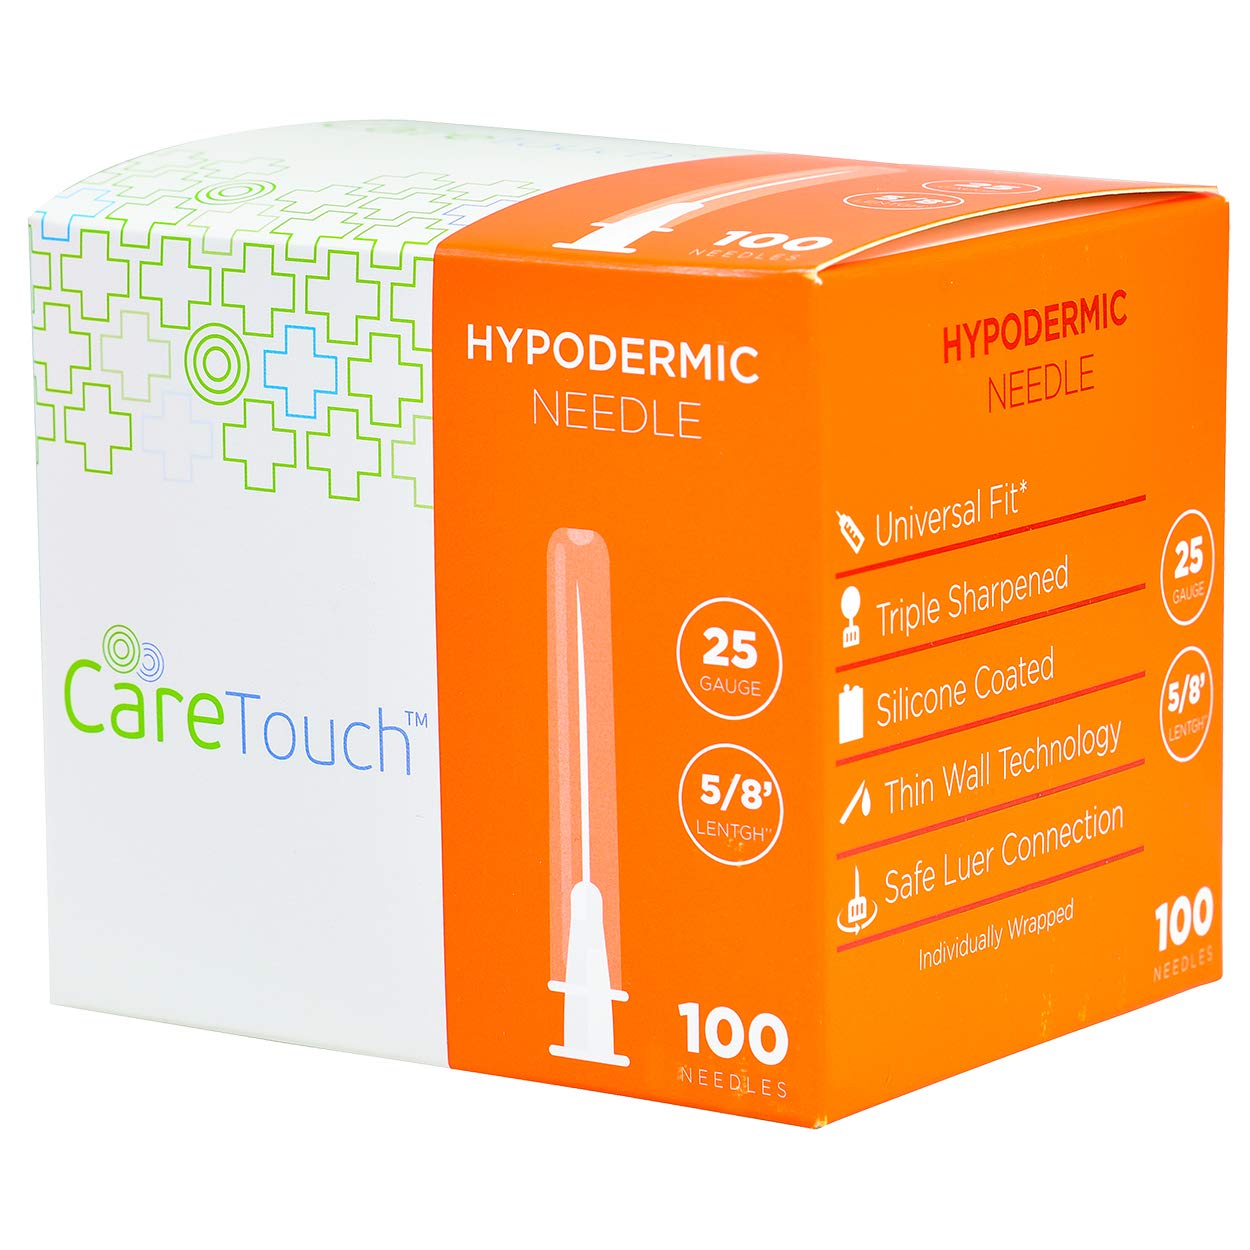 Care Touch Hypodermic Needle, 25GX5/8 (Case of 10 units)